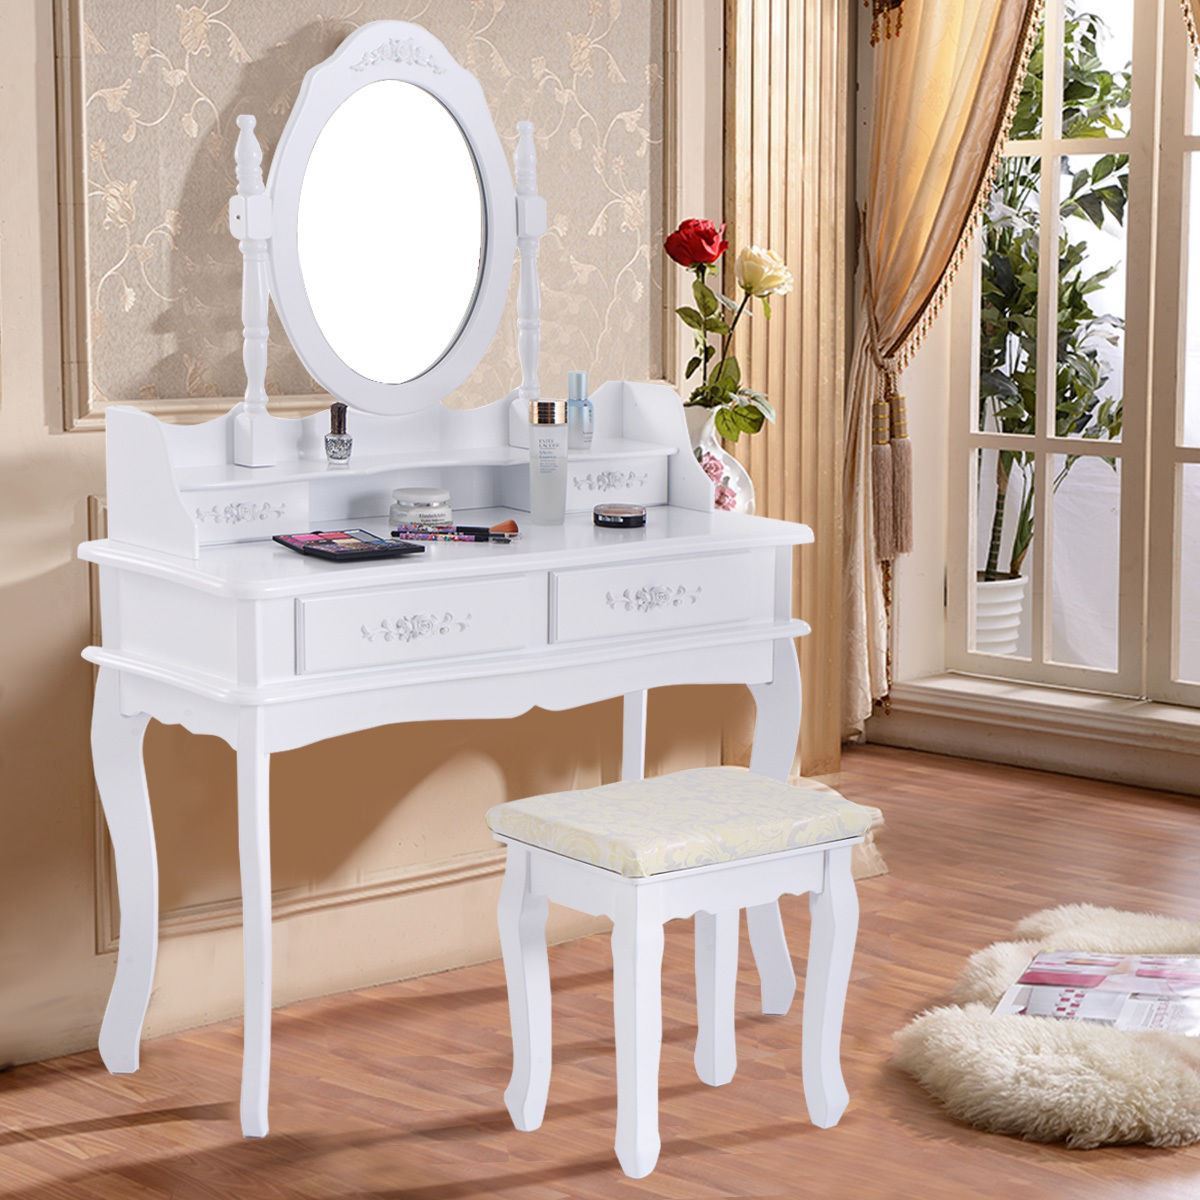 Cb17005 Jewelry Makeup Wood Table Set With A Stool 4 Drawer Mirror